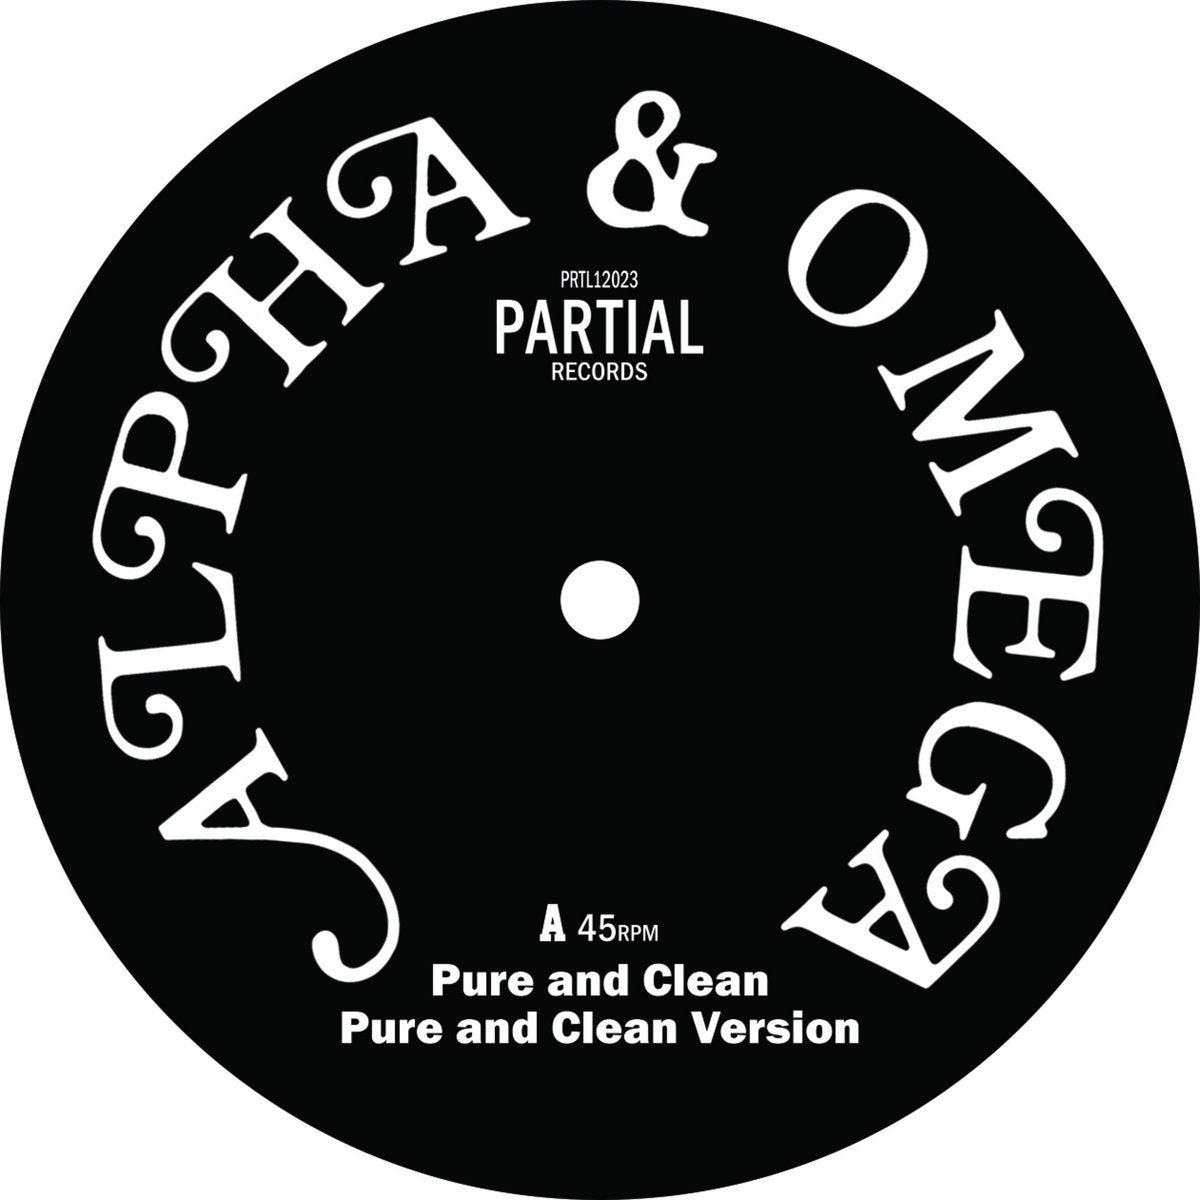 Alpha and Omega - Pure and Clean - Dubplate